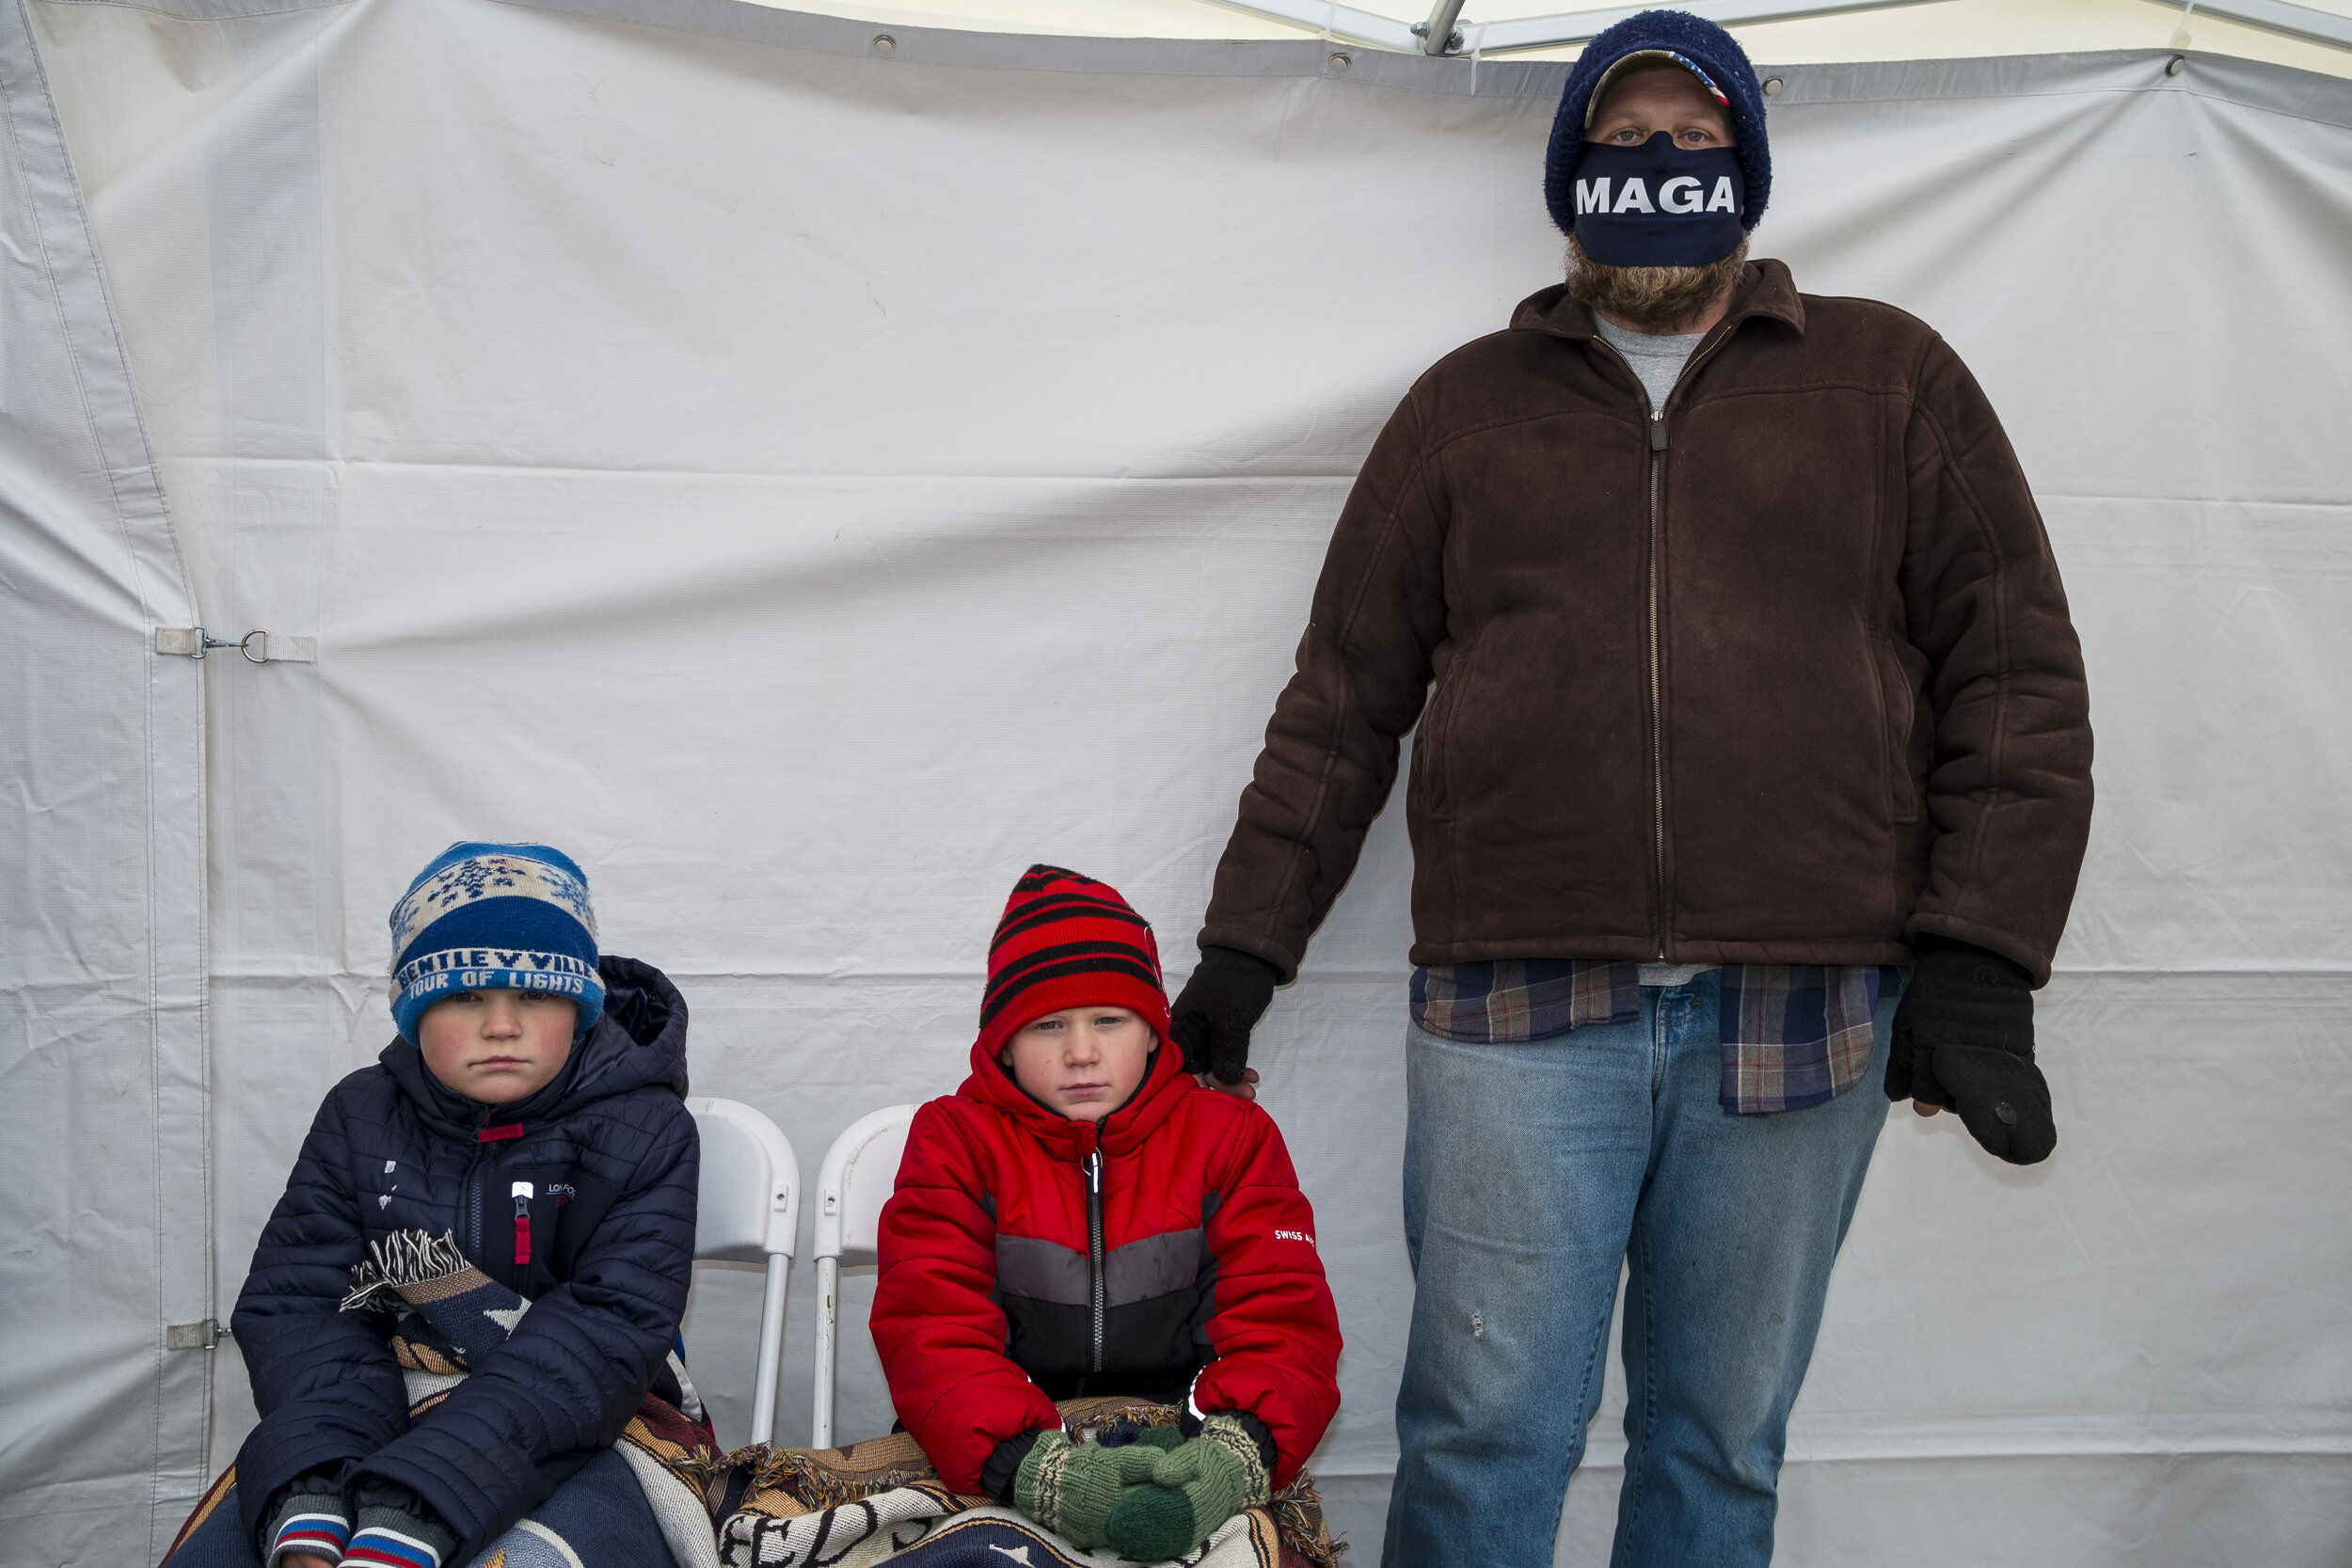  (From left) Charlie, Zacch, and Chris Reed wait in warming tents for Vice President Mike Pence to arrive at the Range Regional Airport on October 26, 2020 in Hibbing, Minnesota. (Photo by Brooklynn Kascel/Getty Images) 